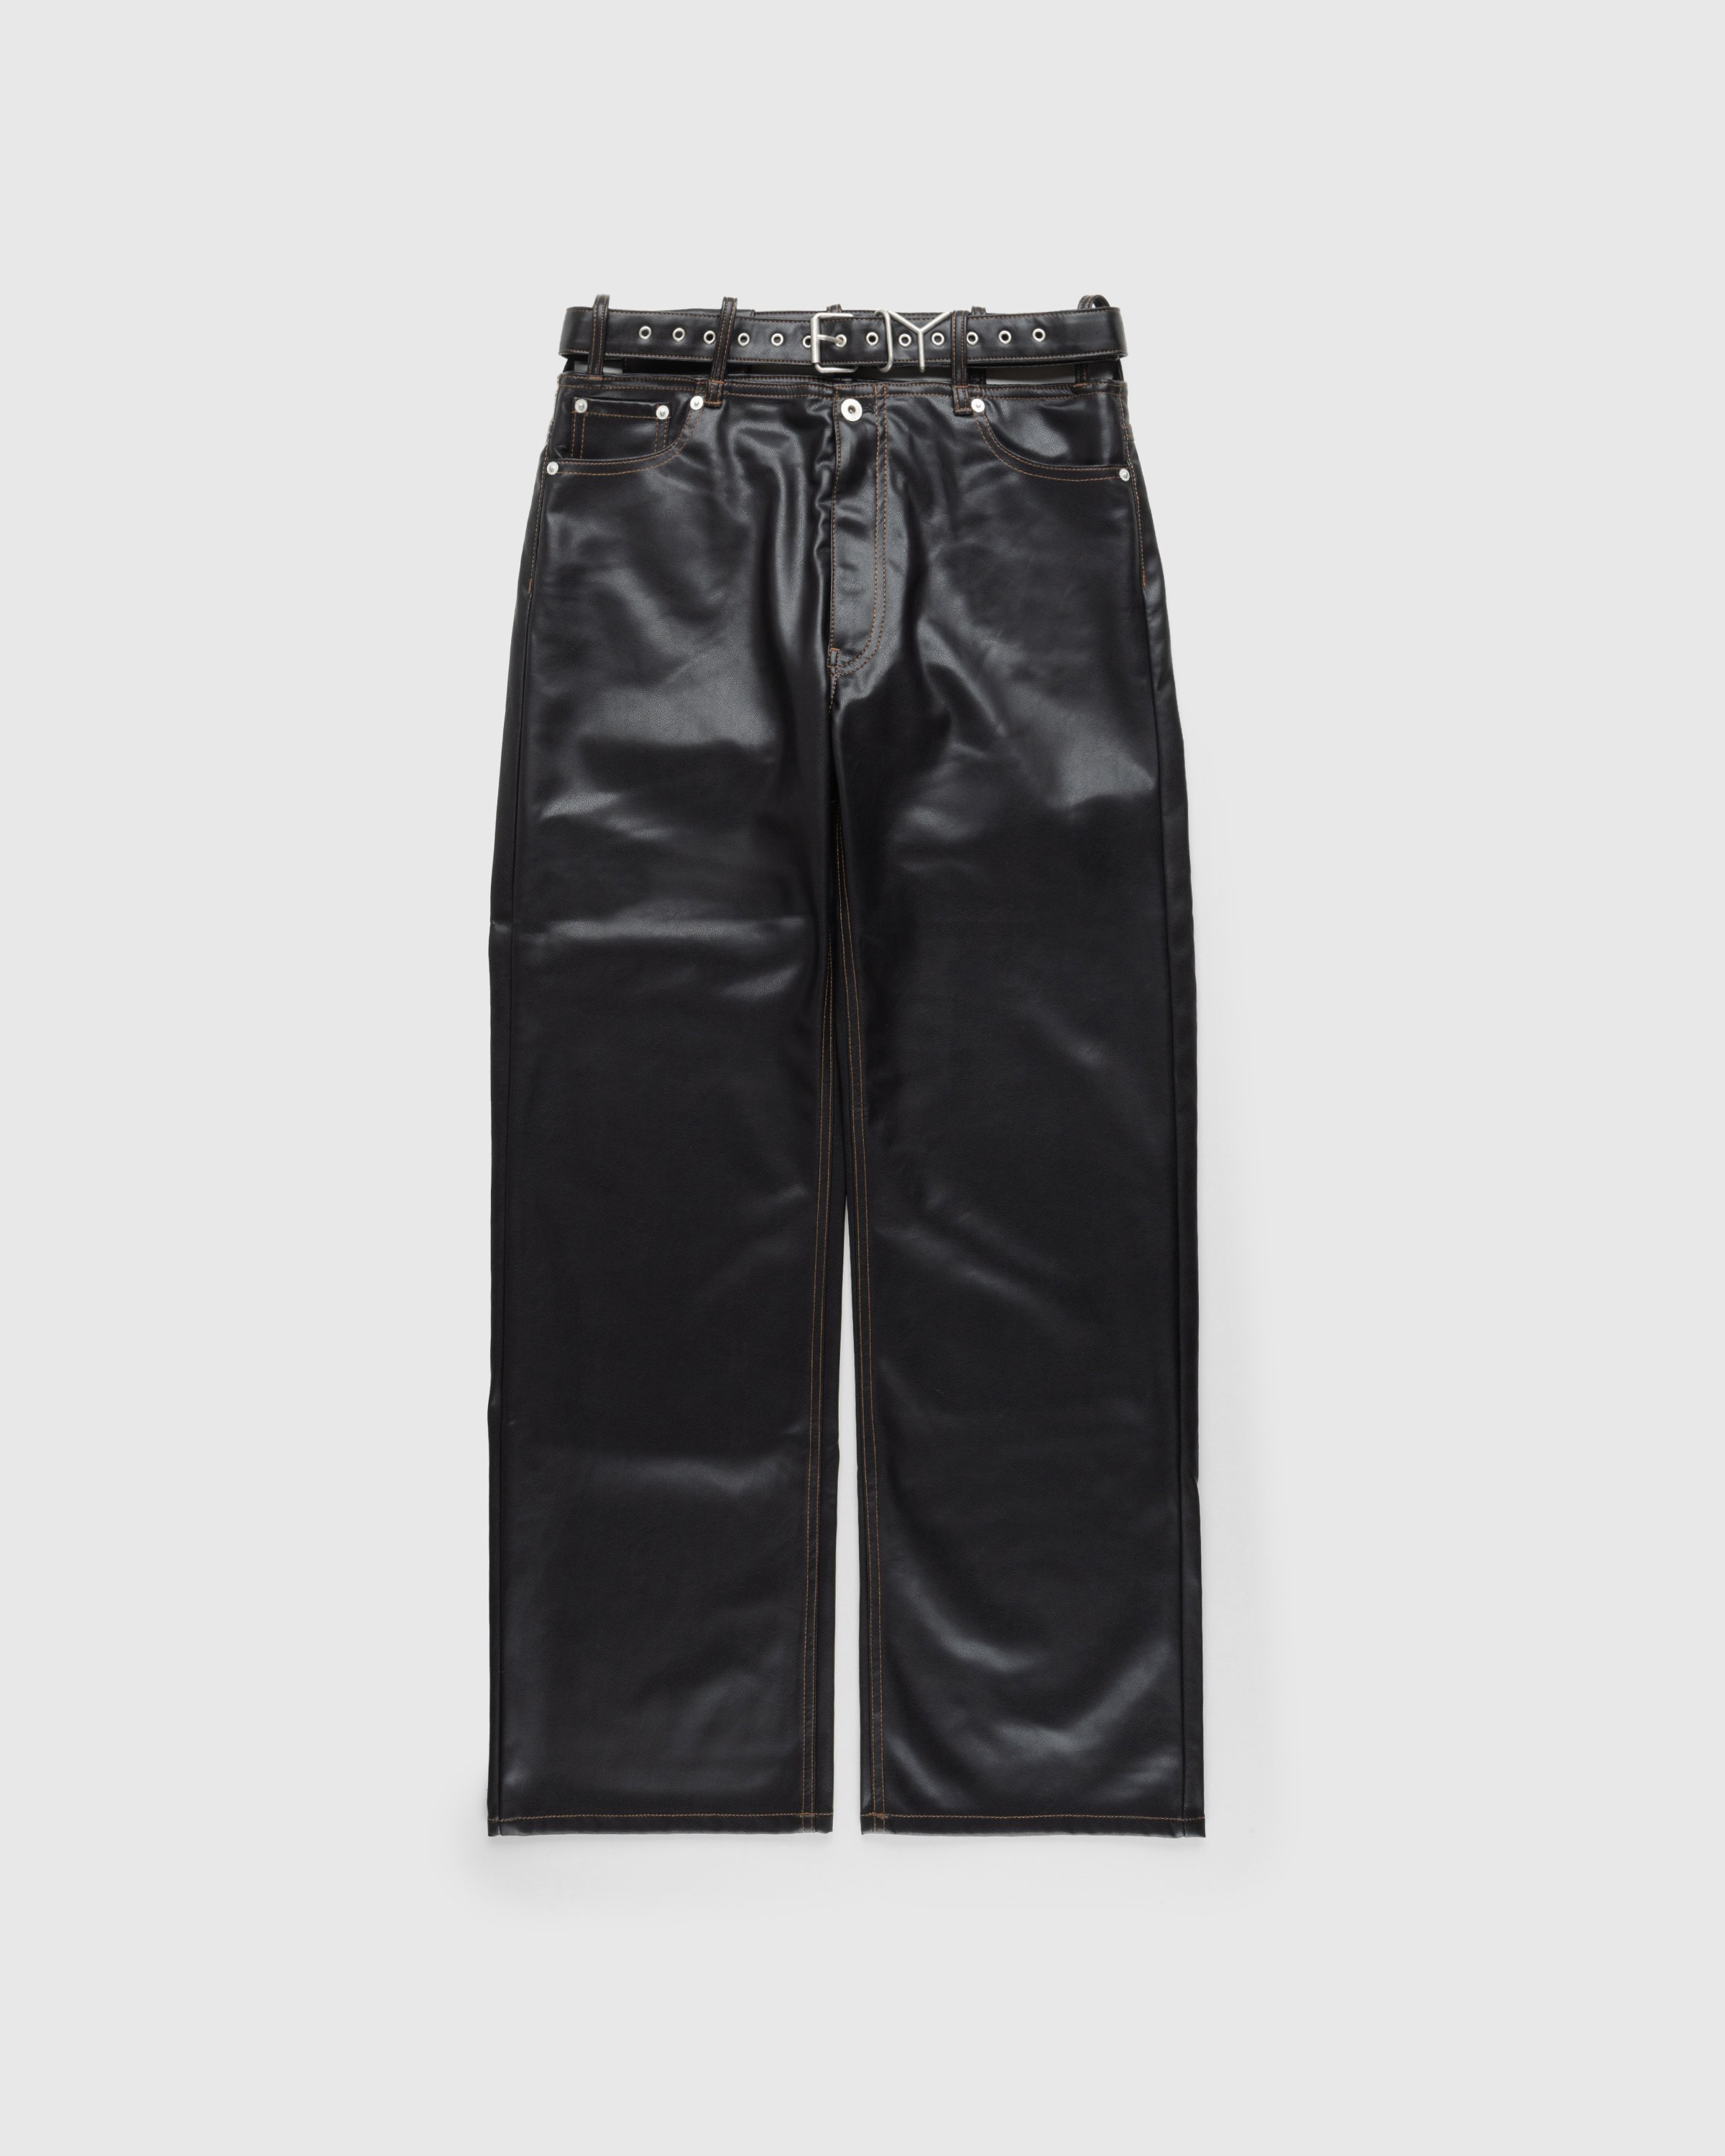 Y/Project - Y BELT LEATHER PANTS - Clothing - Black - Image 1